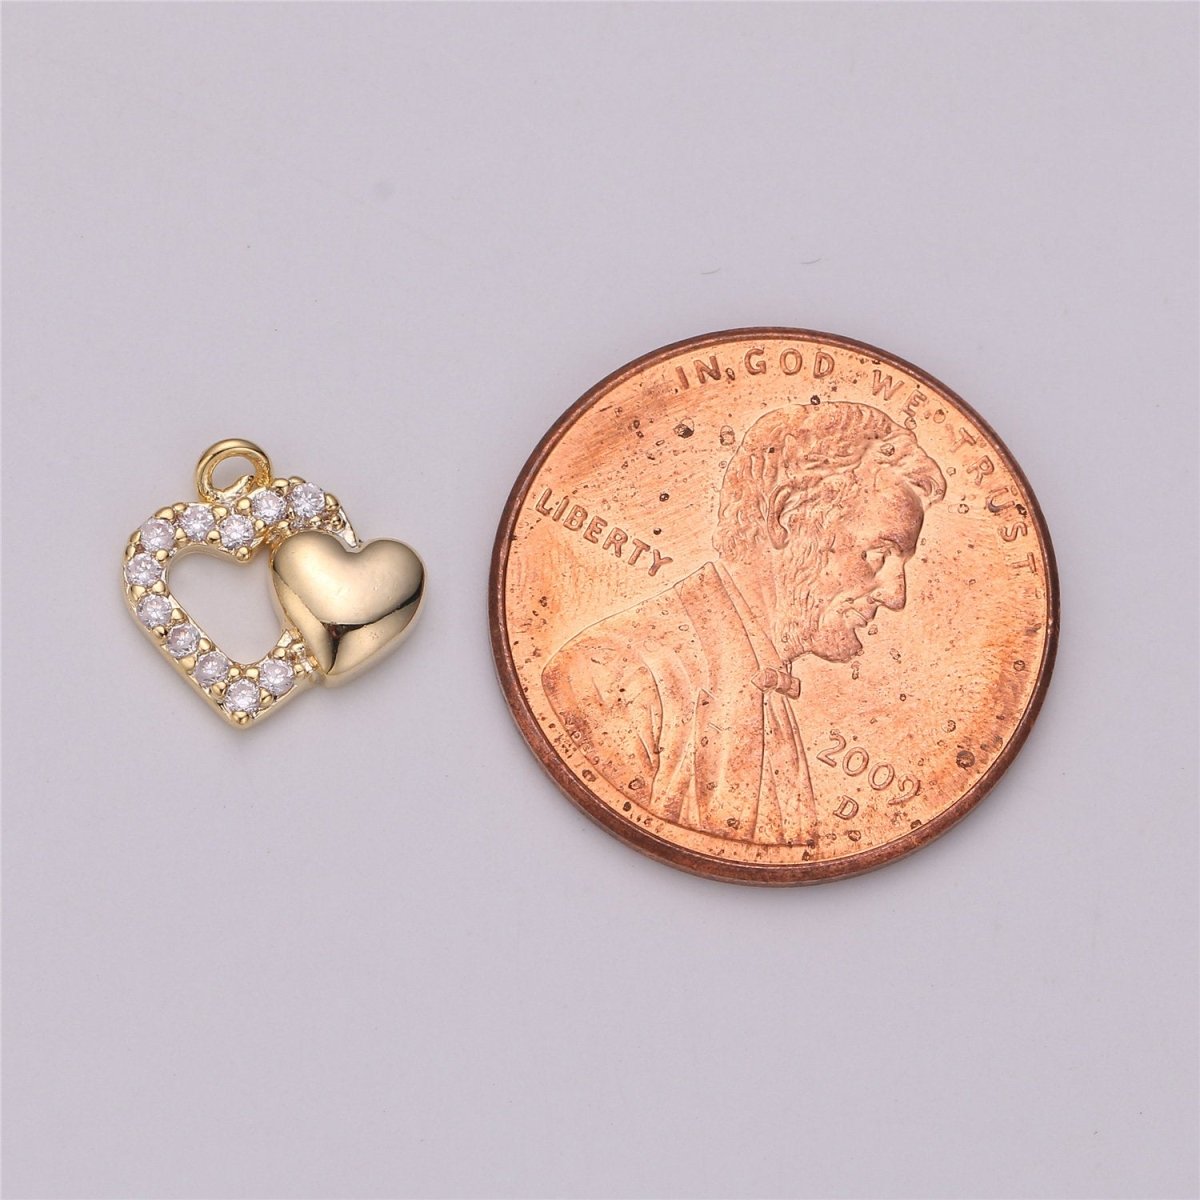 18k Gold Filled Joined Heart Charm,Dual Heart Pendant, Two Hearts Charm, Gold Heart Charm Micro Pave Charm C-528 - DLUXCA